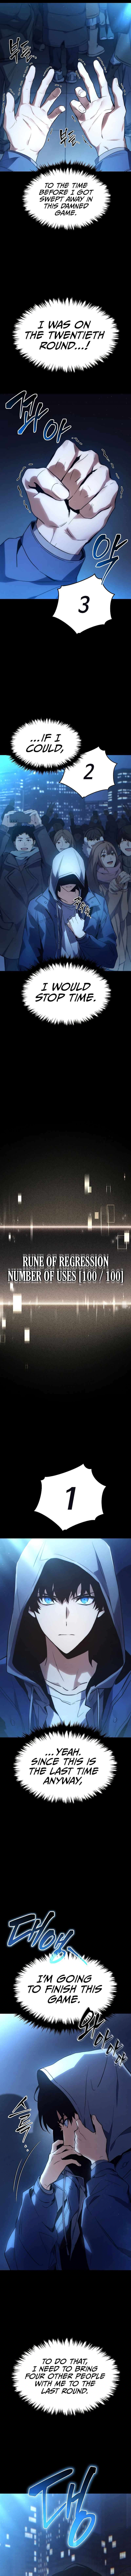 The Max-Level Player's 100th Regression Manga Chapter 1